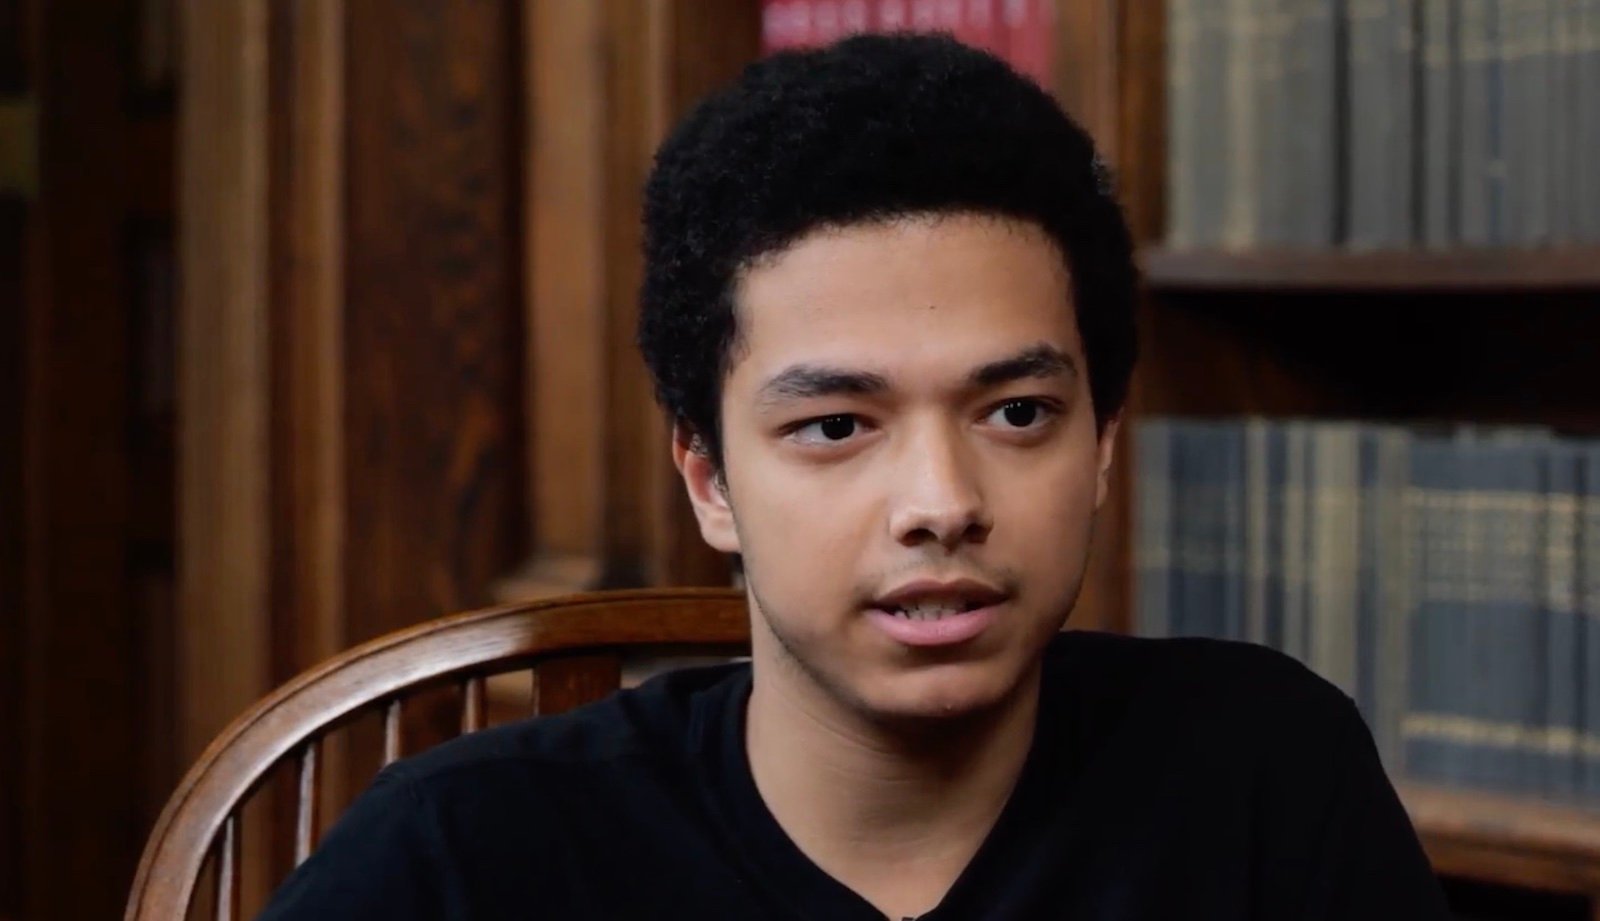 A teenage boy with medium brown skin and dark curly hair sits in a chair talking to camera in front of a bookcase